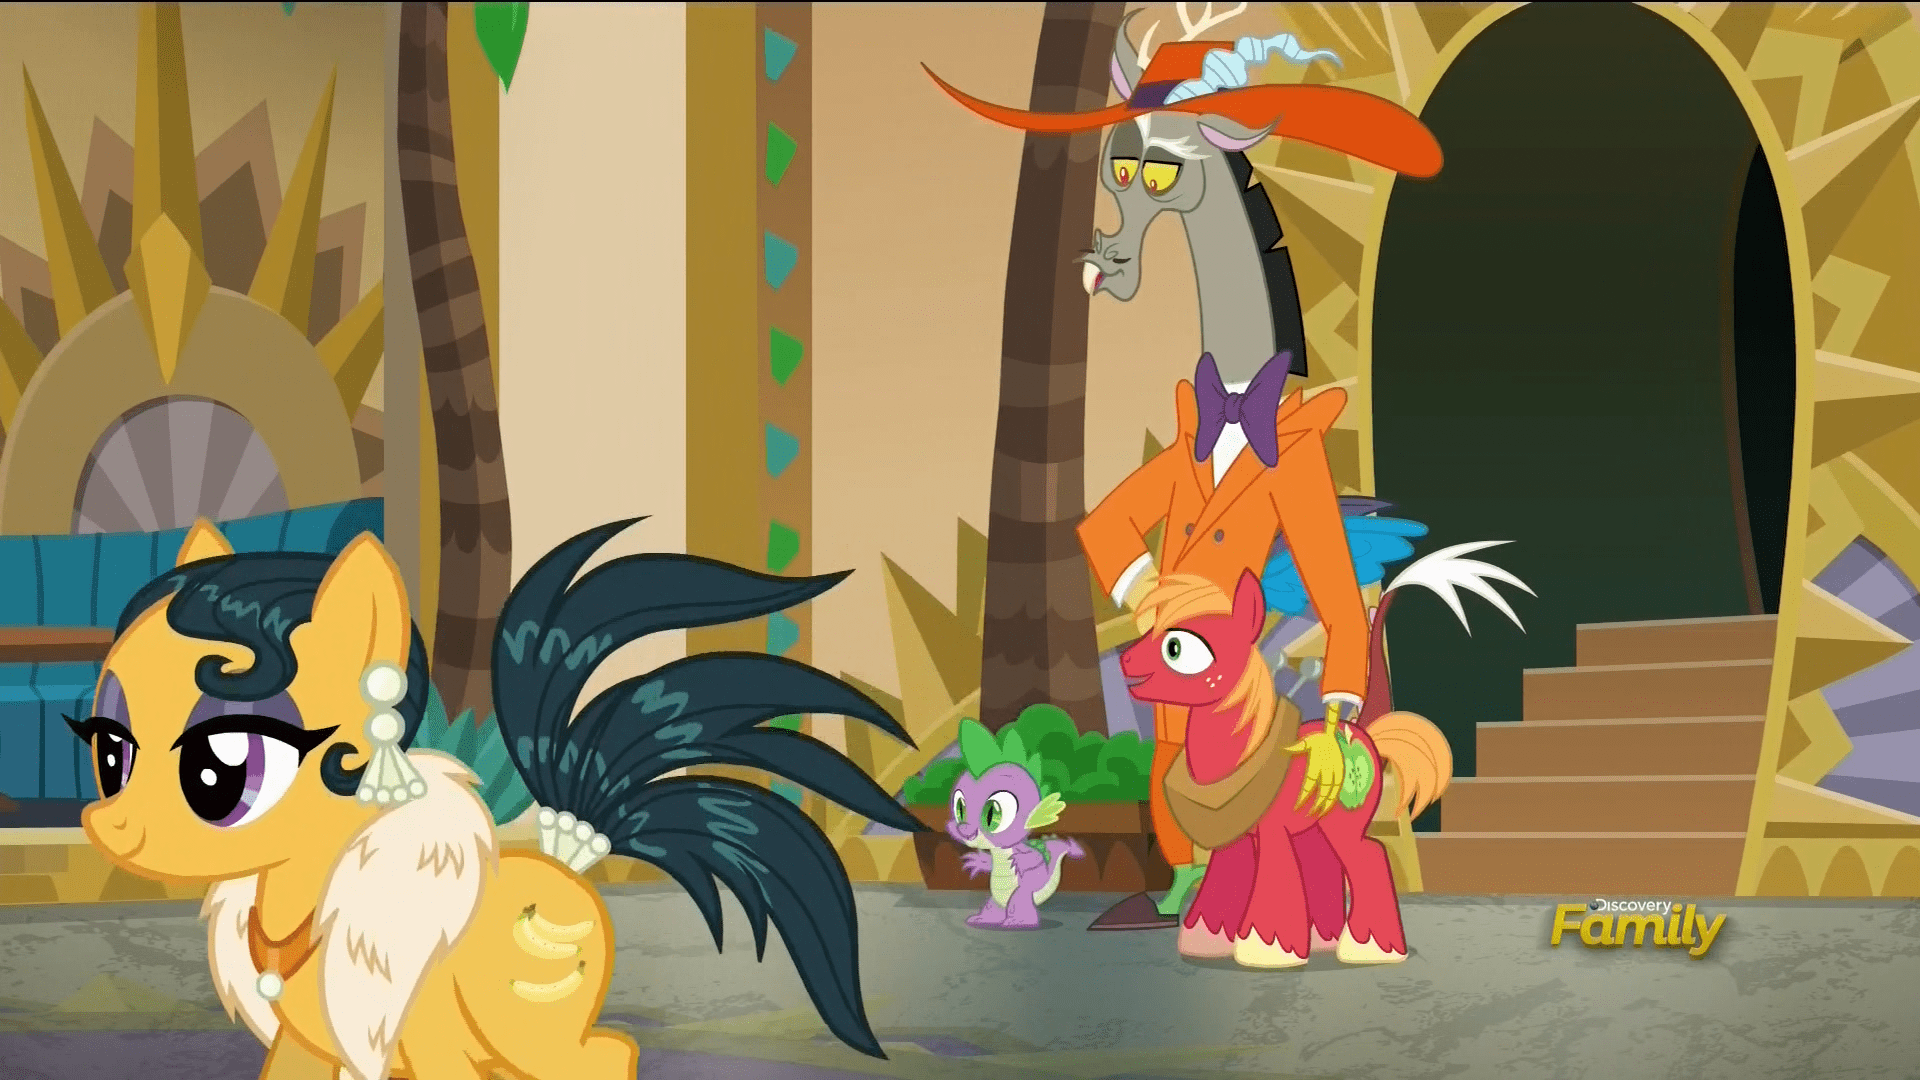 1234871__safe_screencap_spike_ponified_discord_big+macintosh_spoiler-colon-s06e17_dungeons+and+discords_chiquita+banana_zoot+suit.png